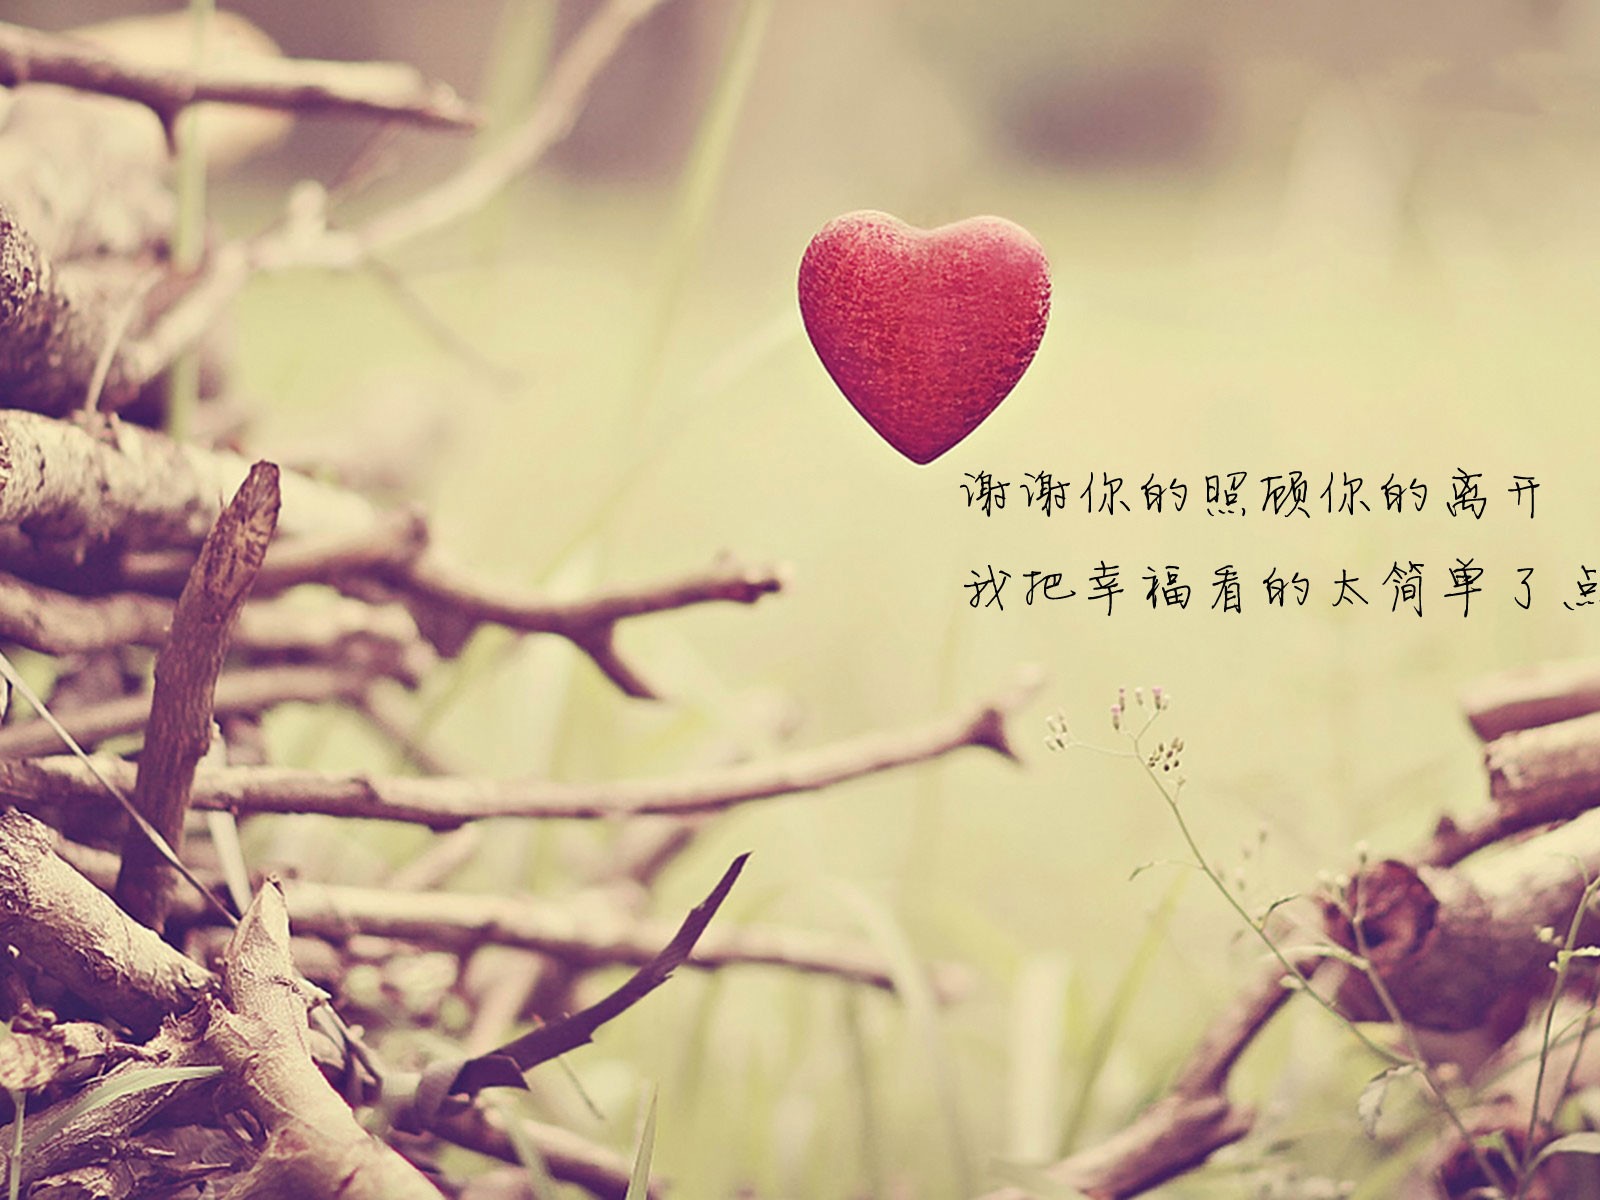 The theme of love, creative heart-shaped HD wallpapers #7 - 1600x1200